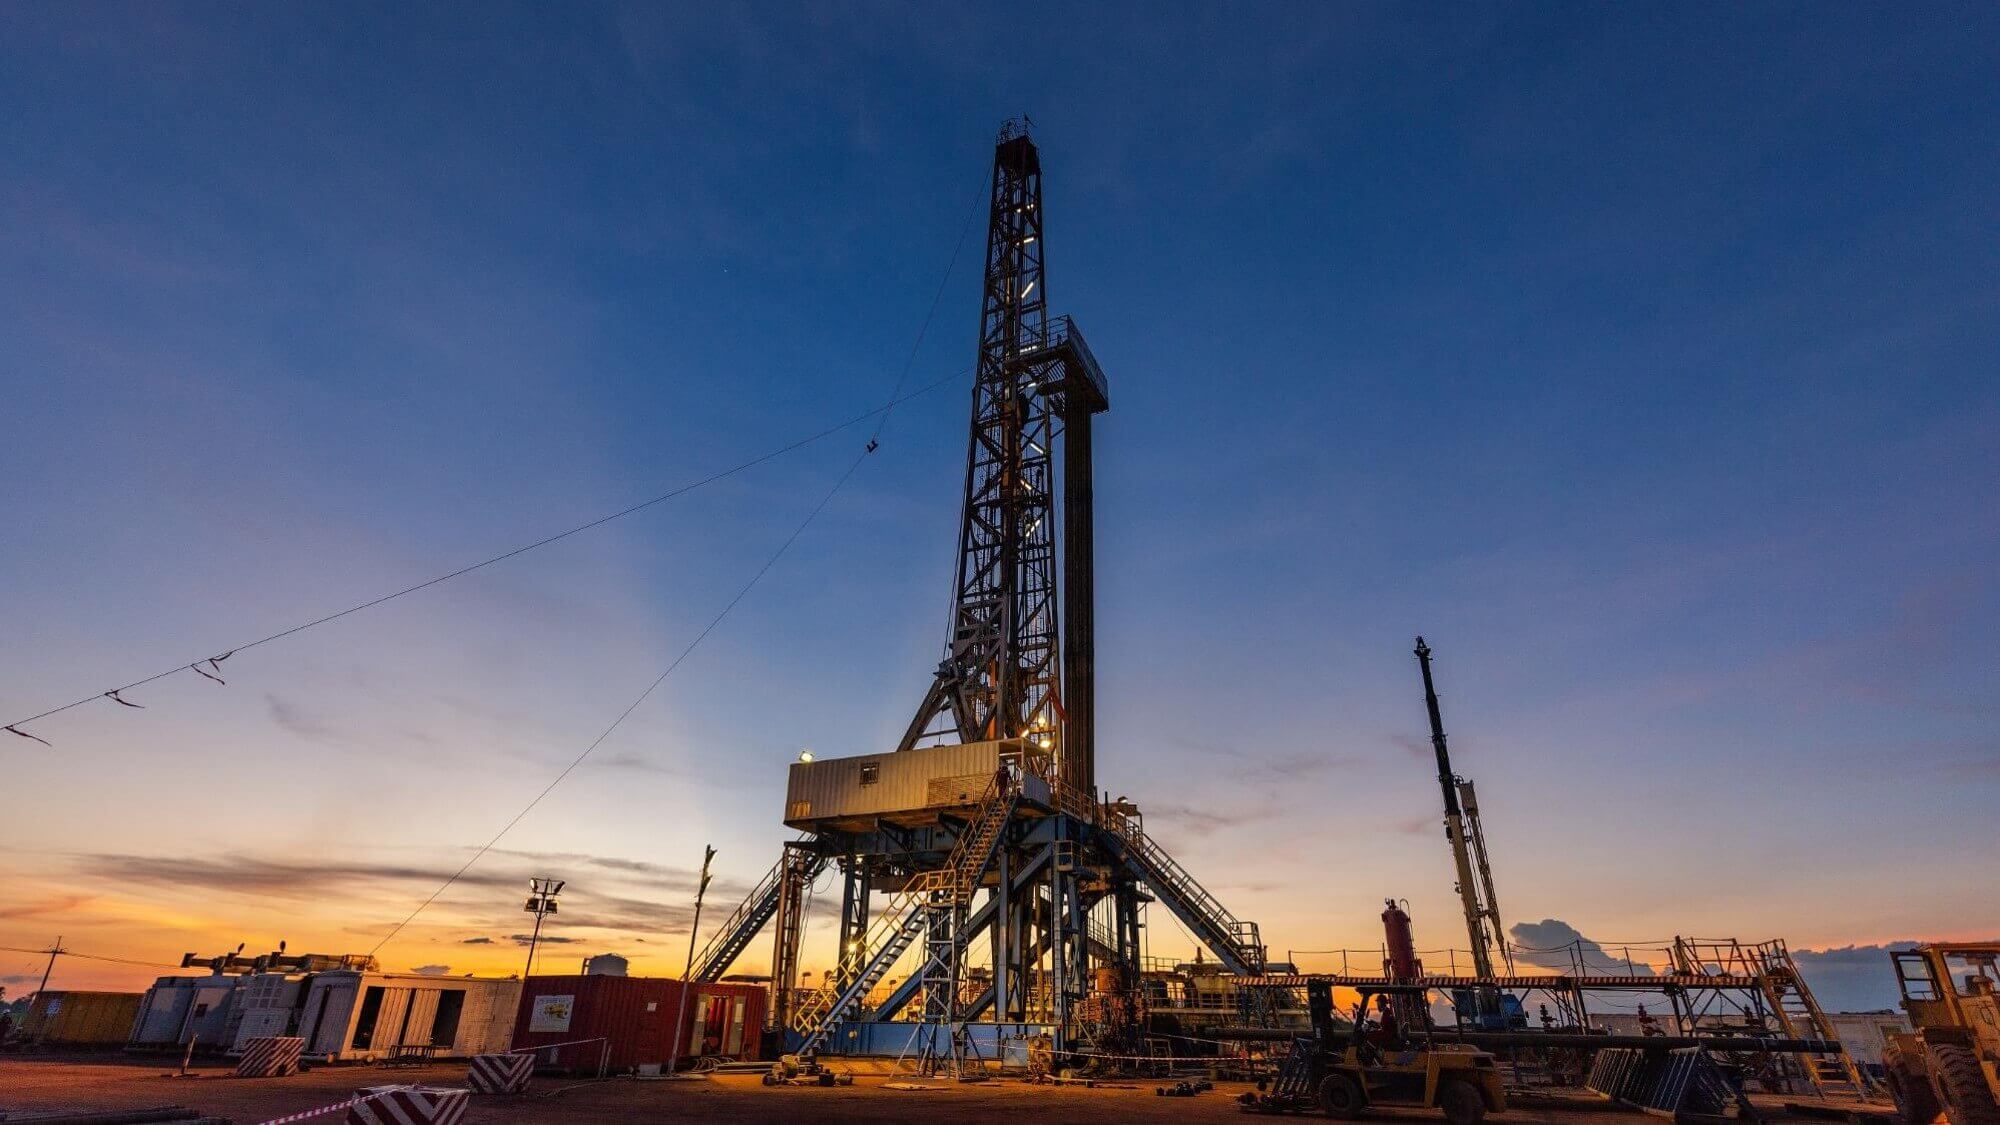 Drilling site and equipment at dusk